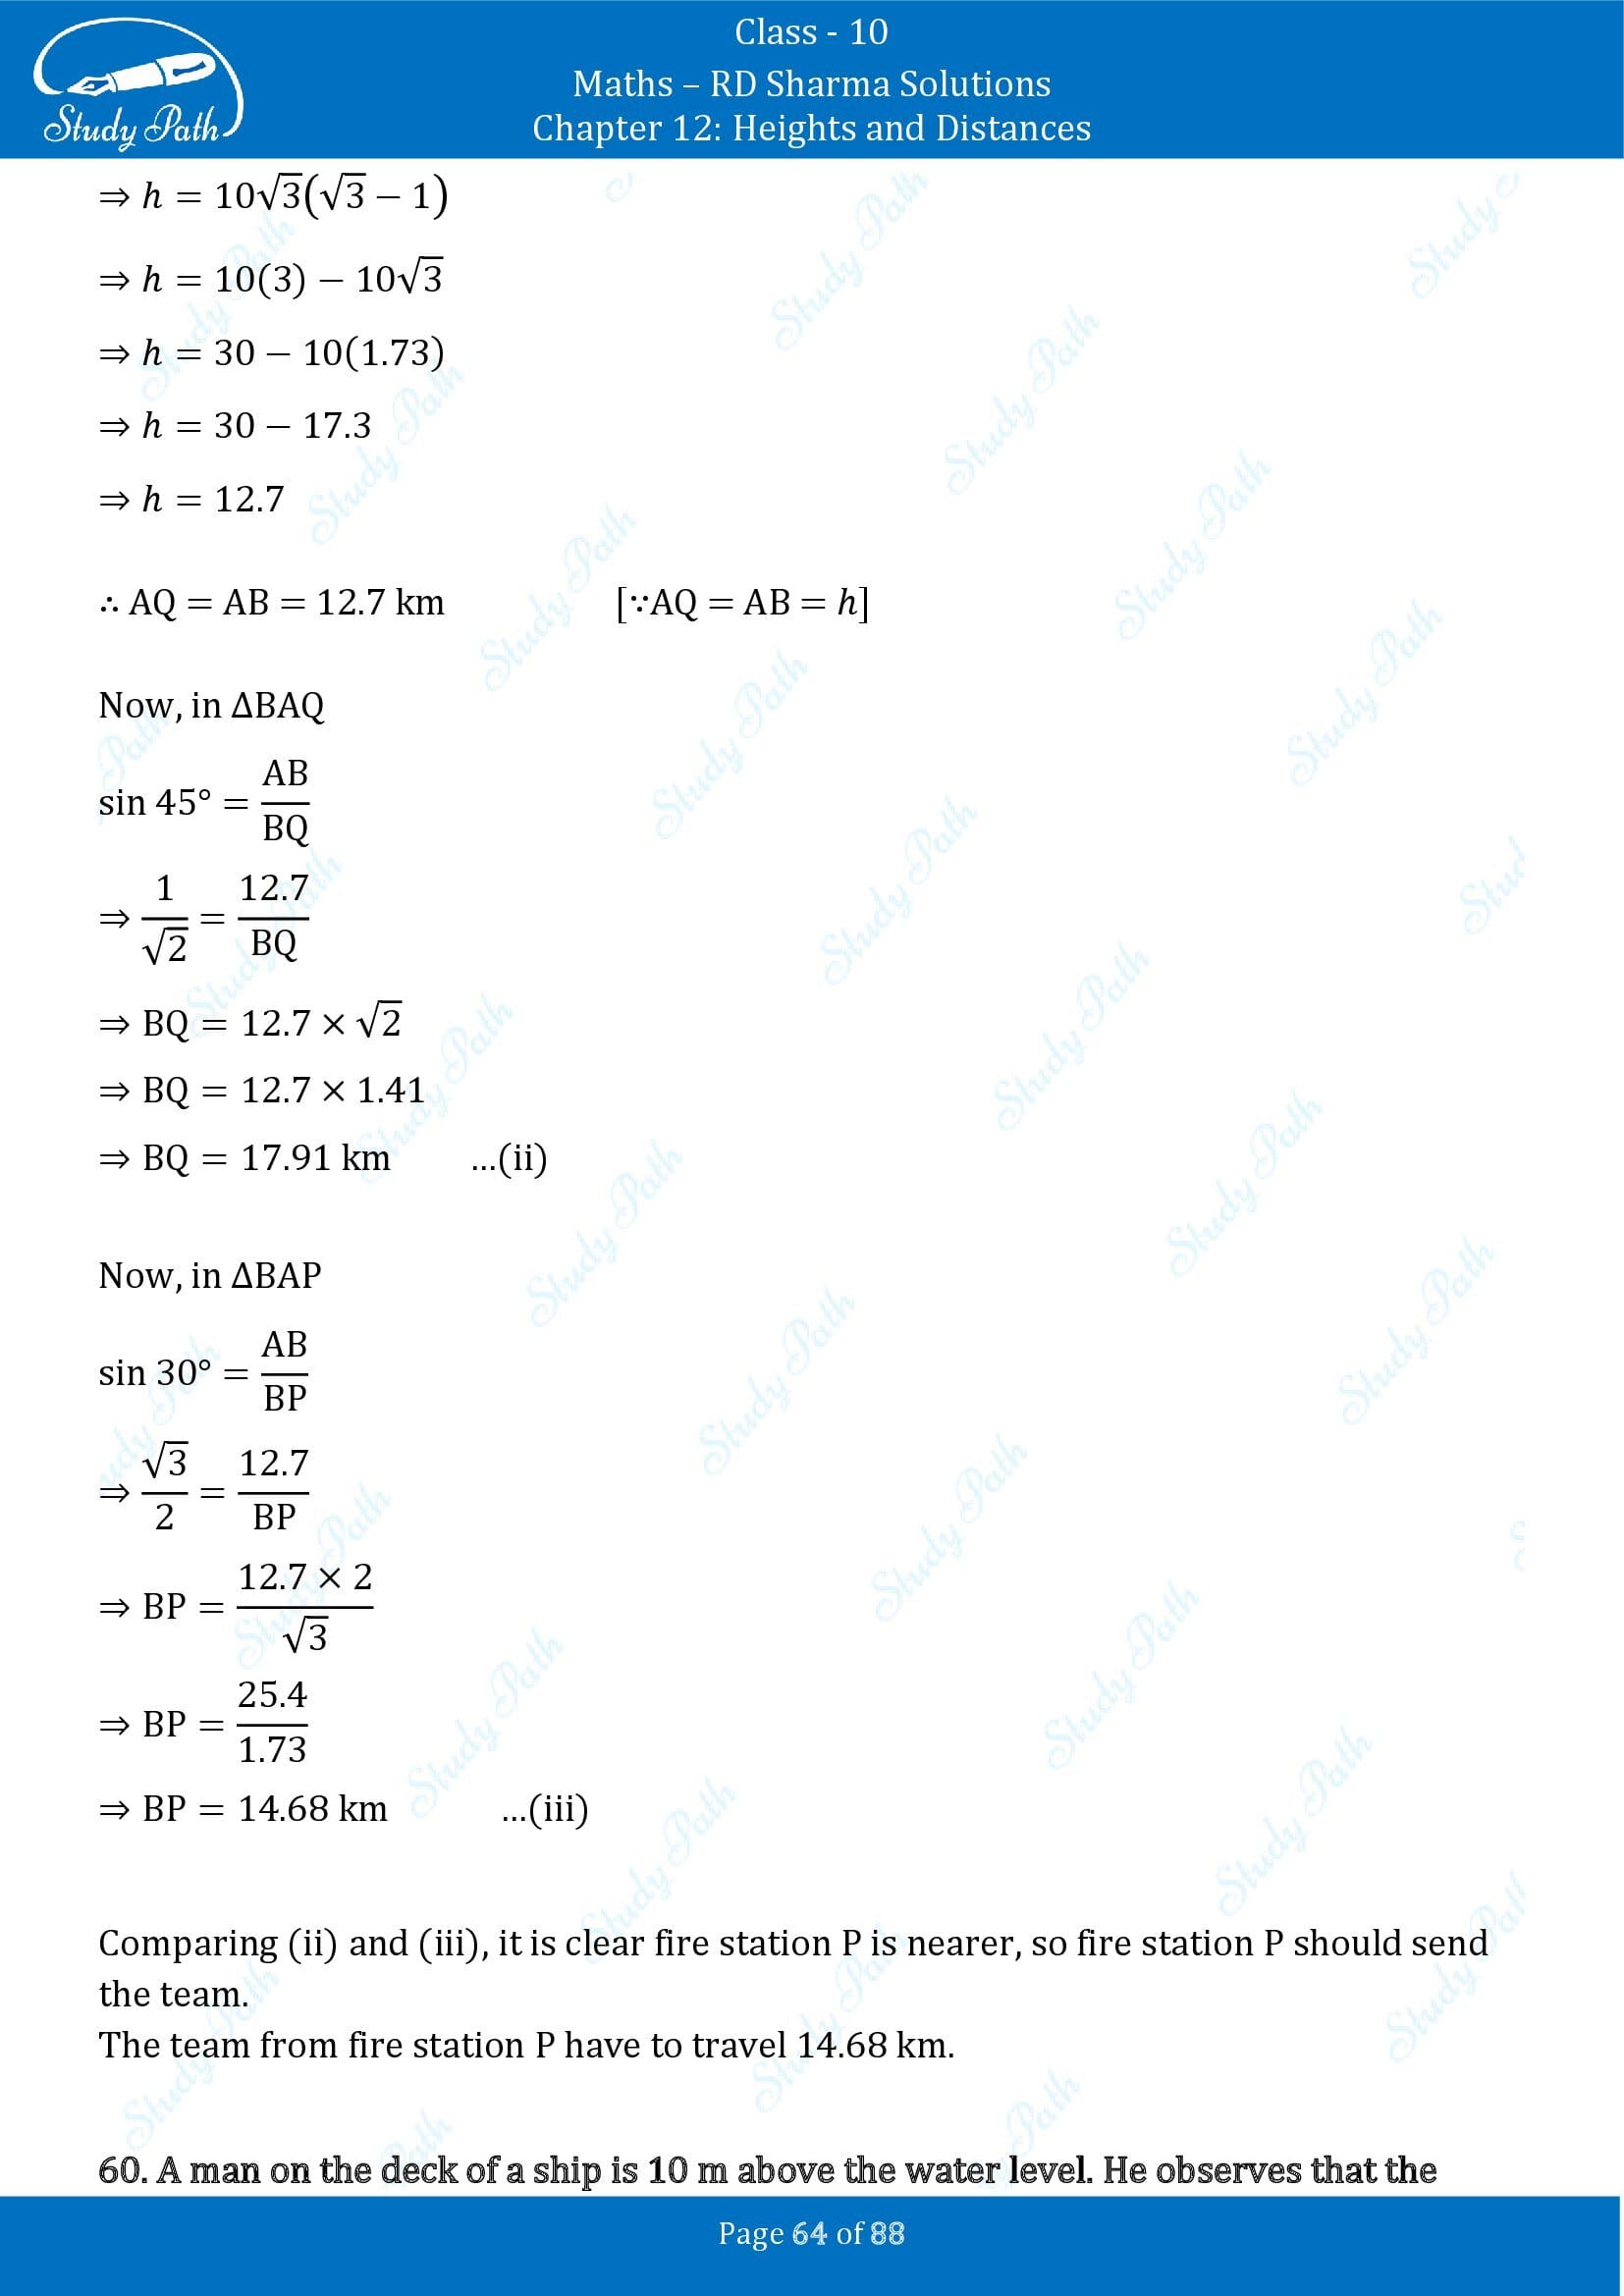 RD Sharma Solutions Class 10 Chapter 12 Heights and Distances Exercise 12.1 00064